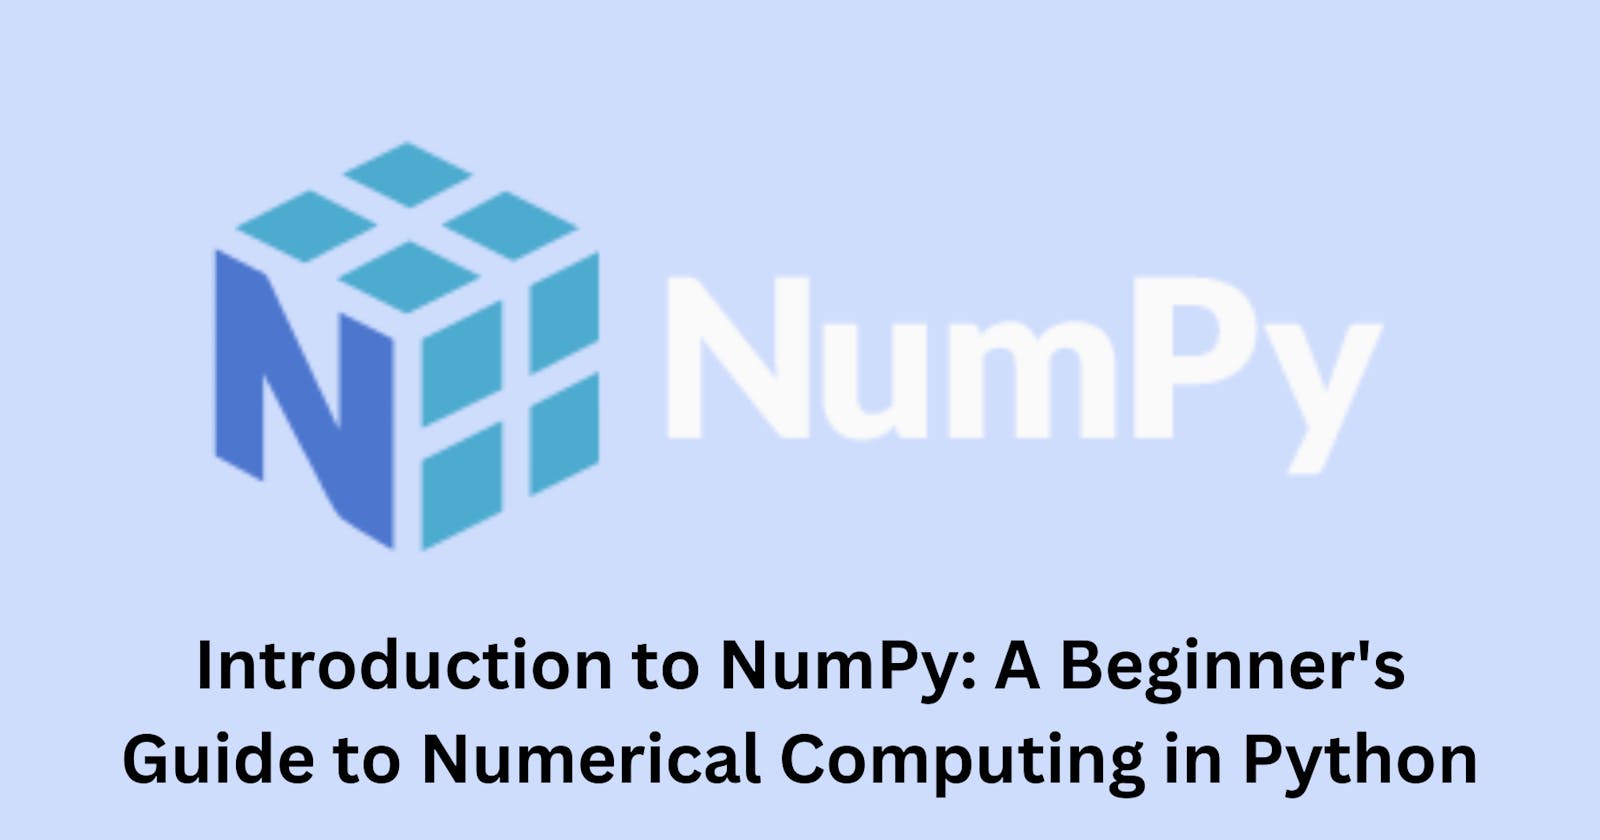 Introduction to NumPy: A Beginner's Guide to Numerical Computing in Python